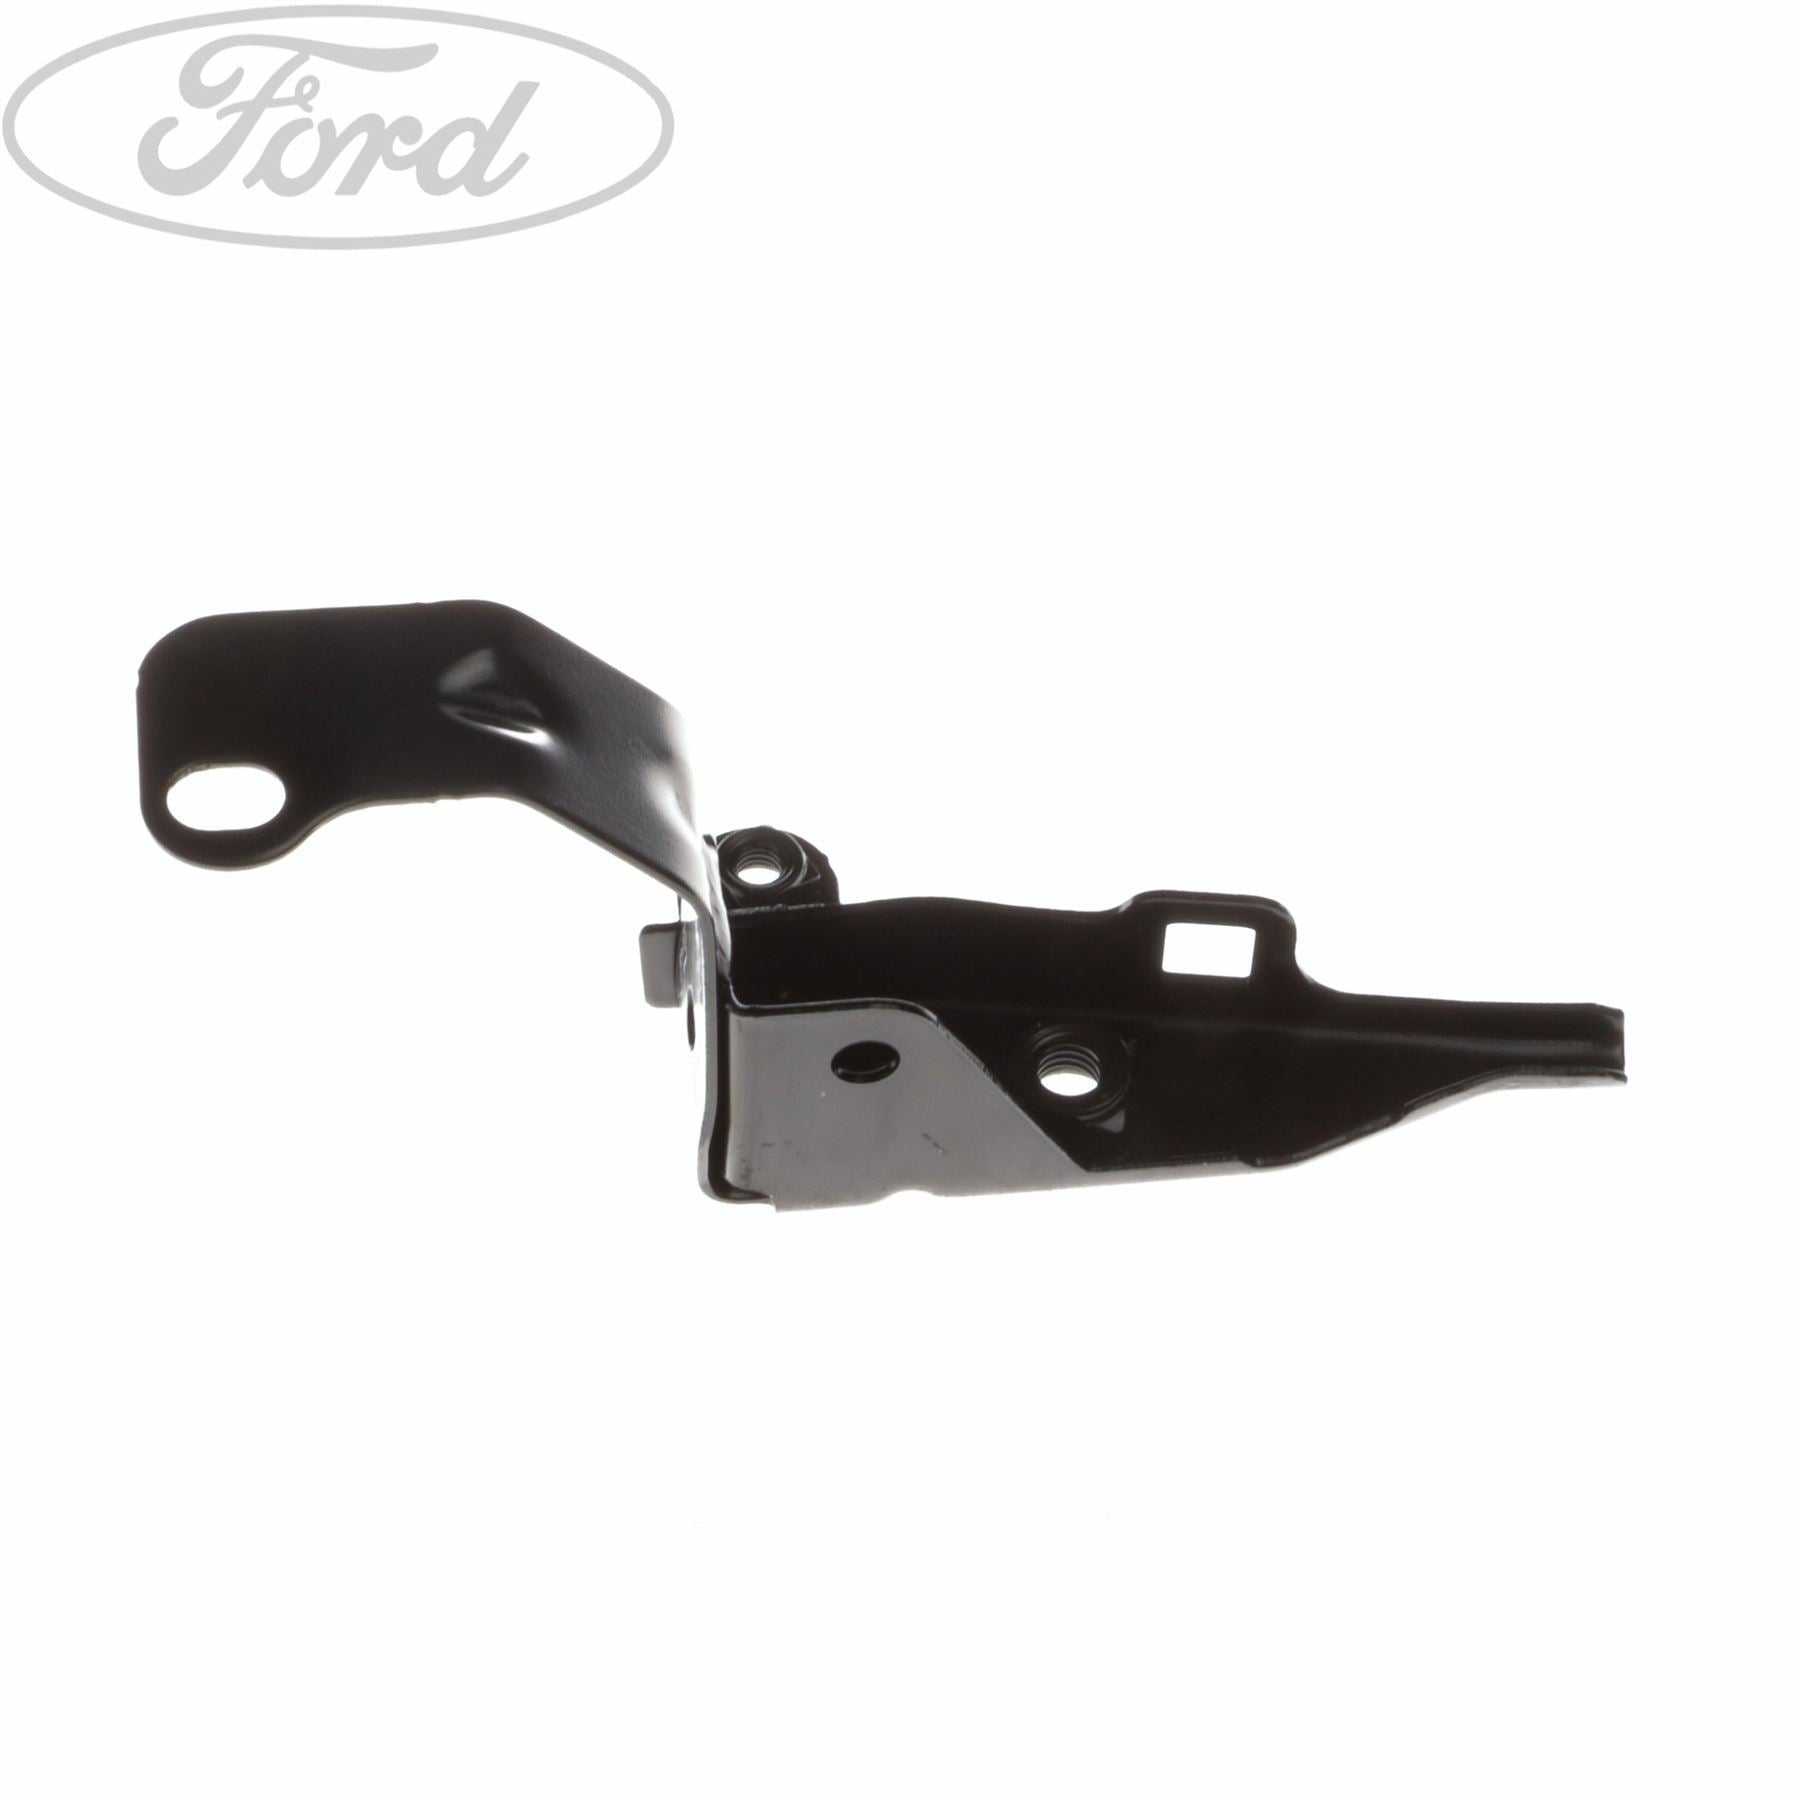 Ford, THERMOSTAT HOUSING MOUNTING BRACKET